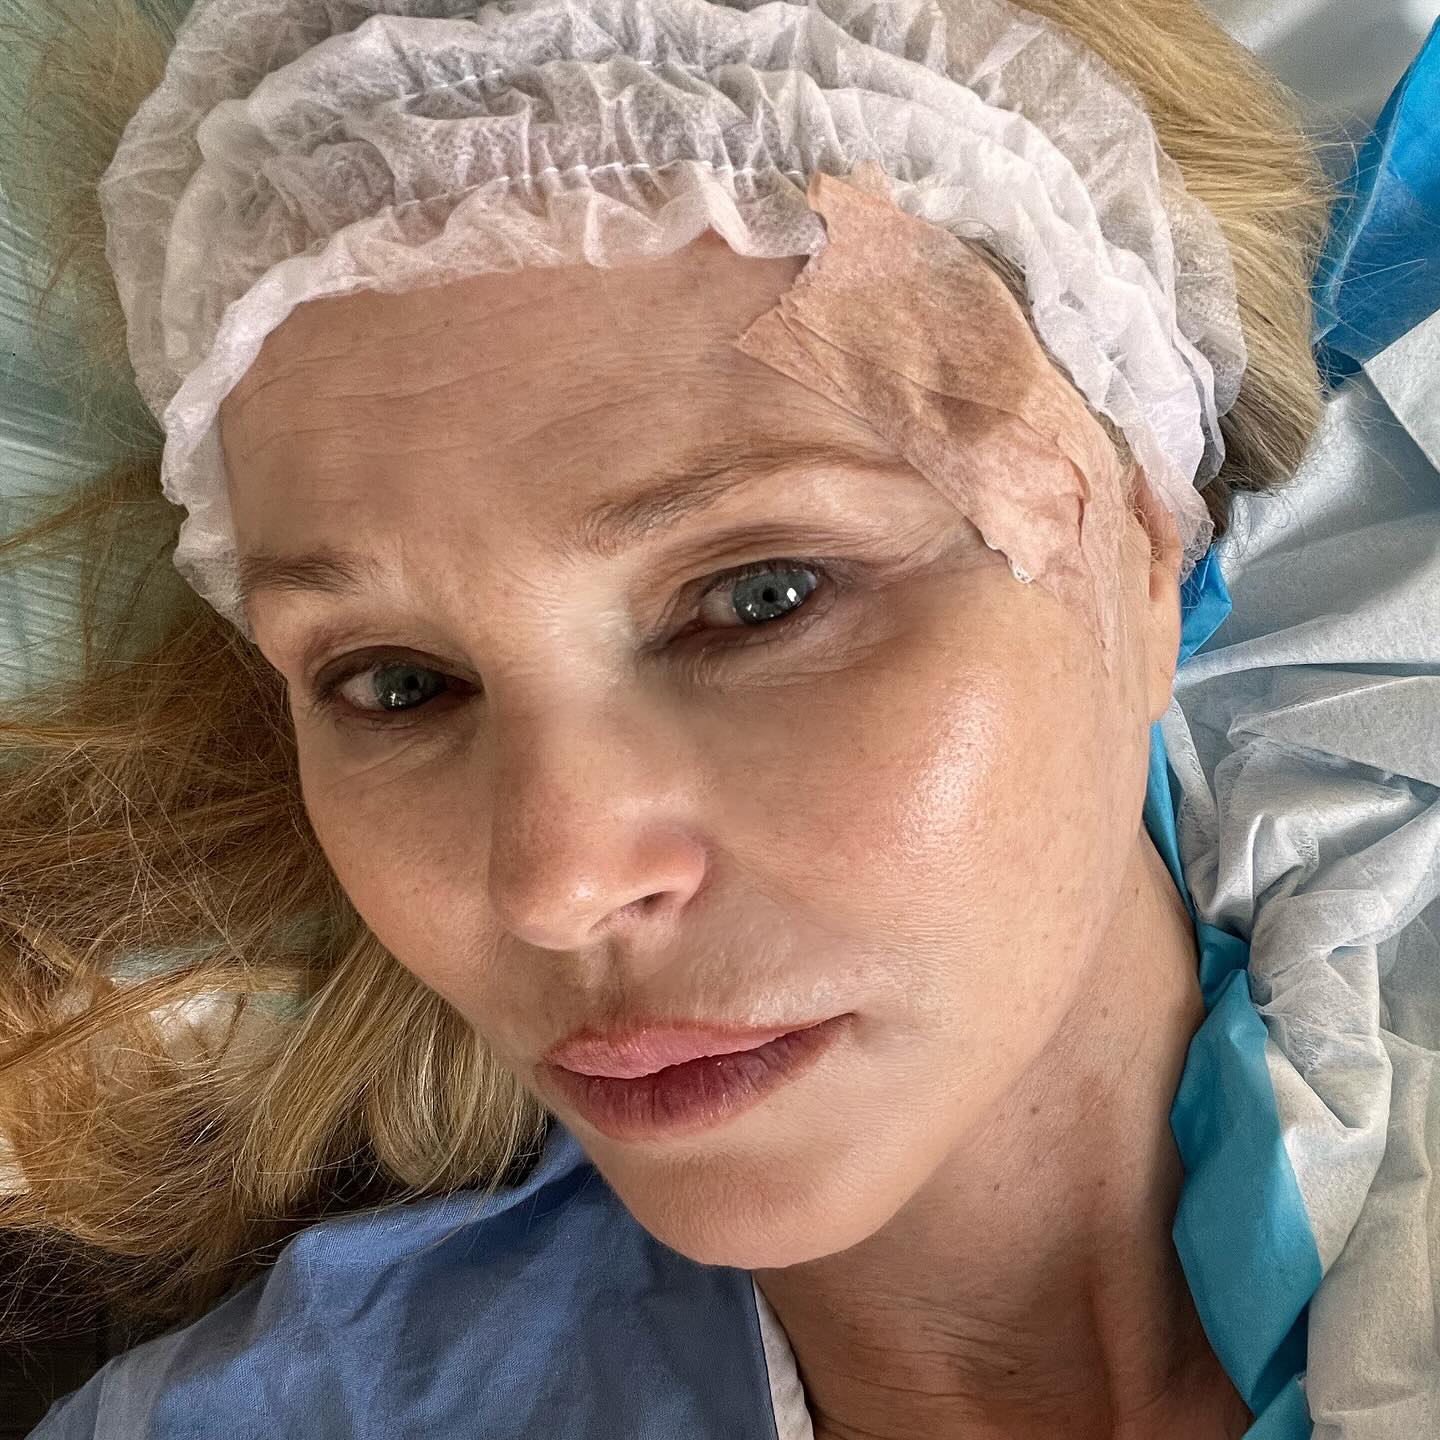 The model underwent surgery to remove the cancer in March, leaving scars on her face